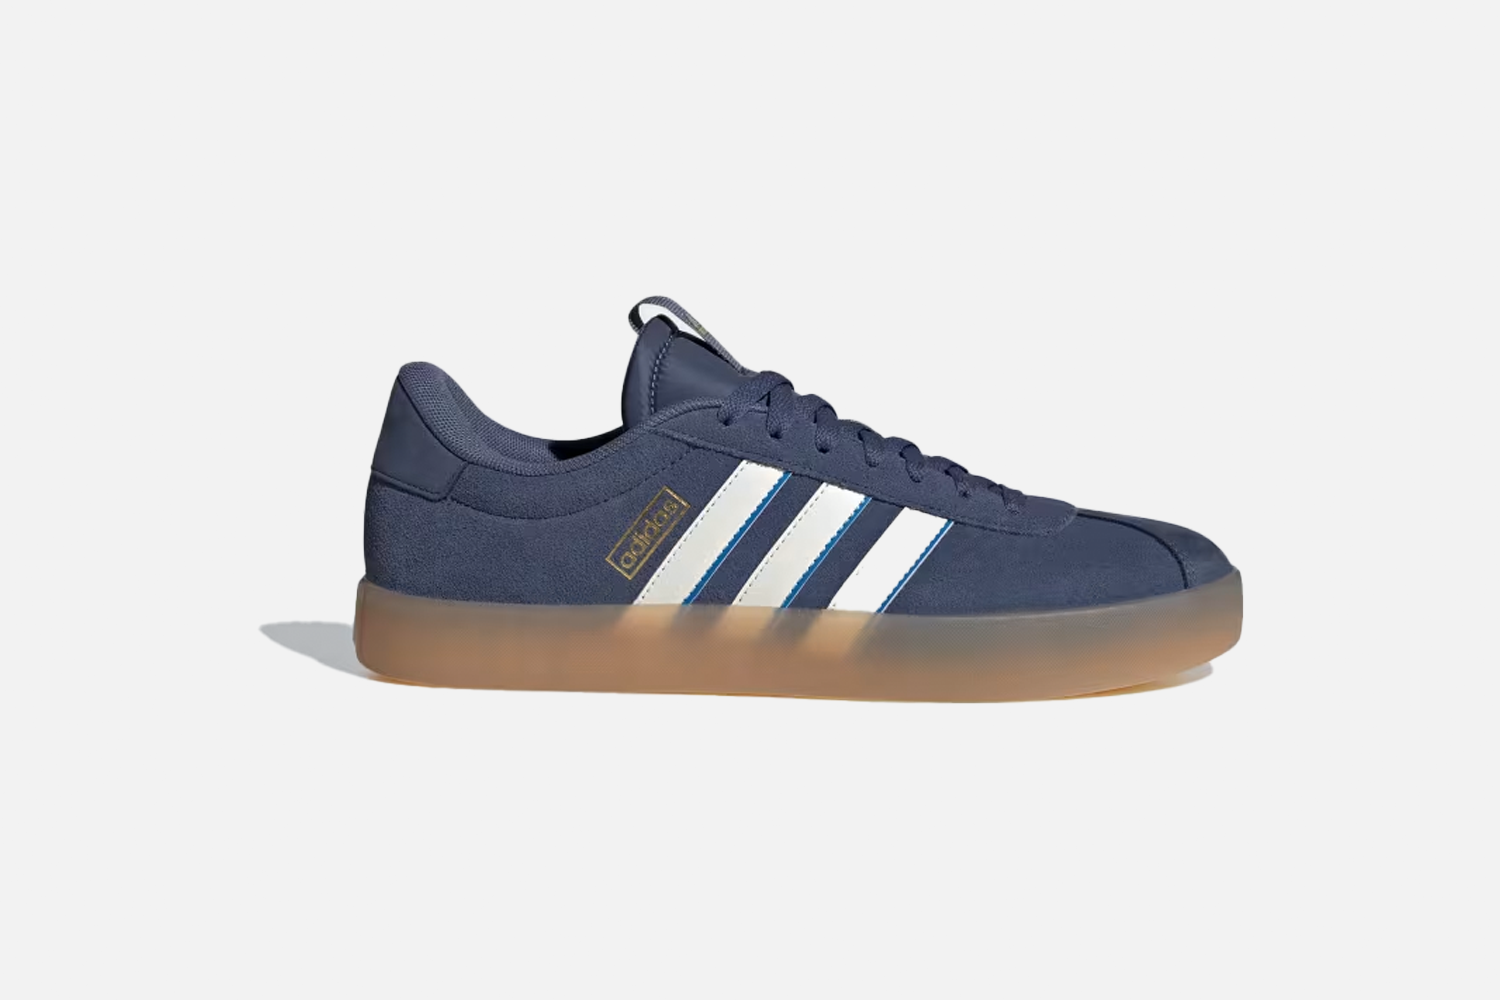 Adidas VL Court 3.0 sneakers